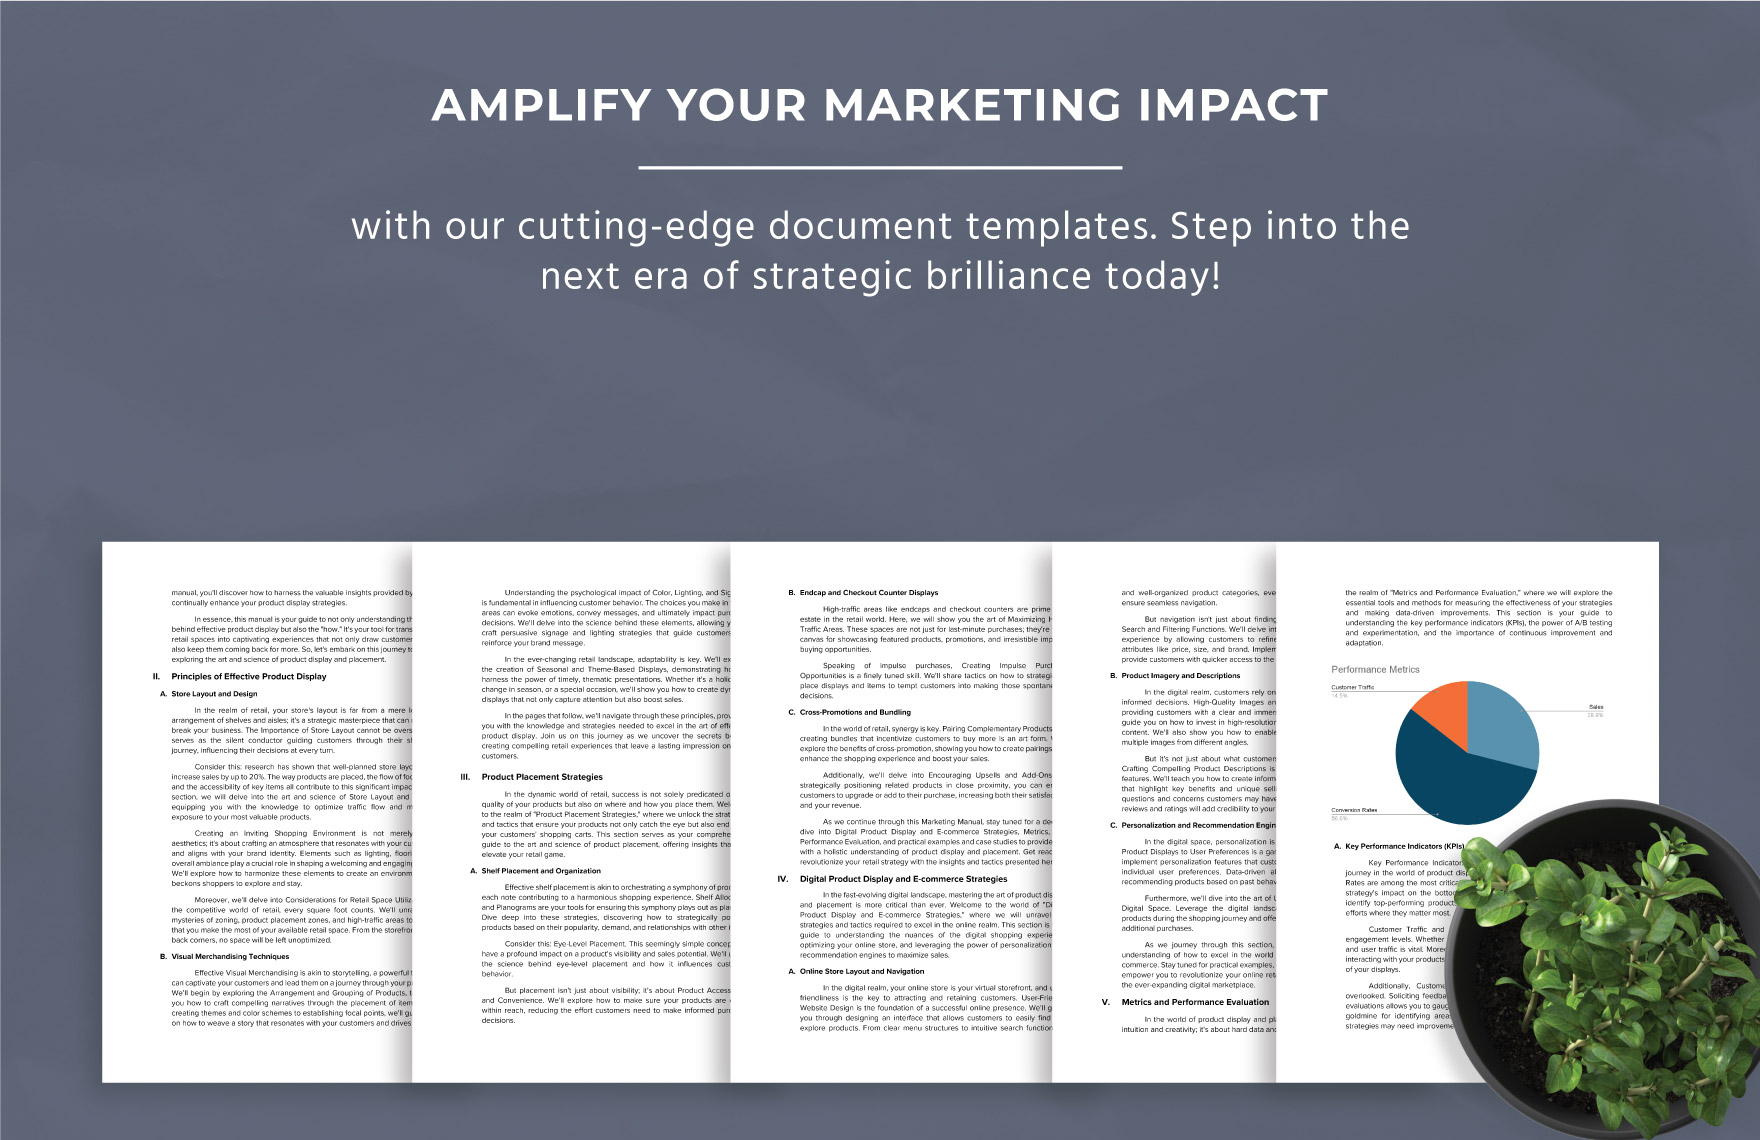 Marketing Manual for Product Display and Placement Template